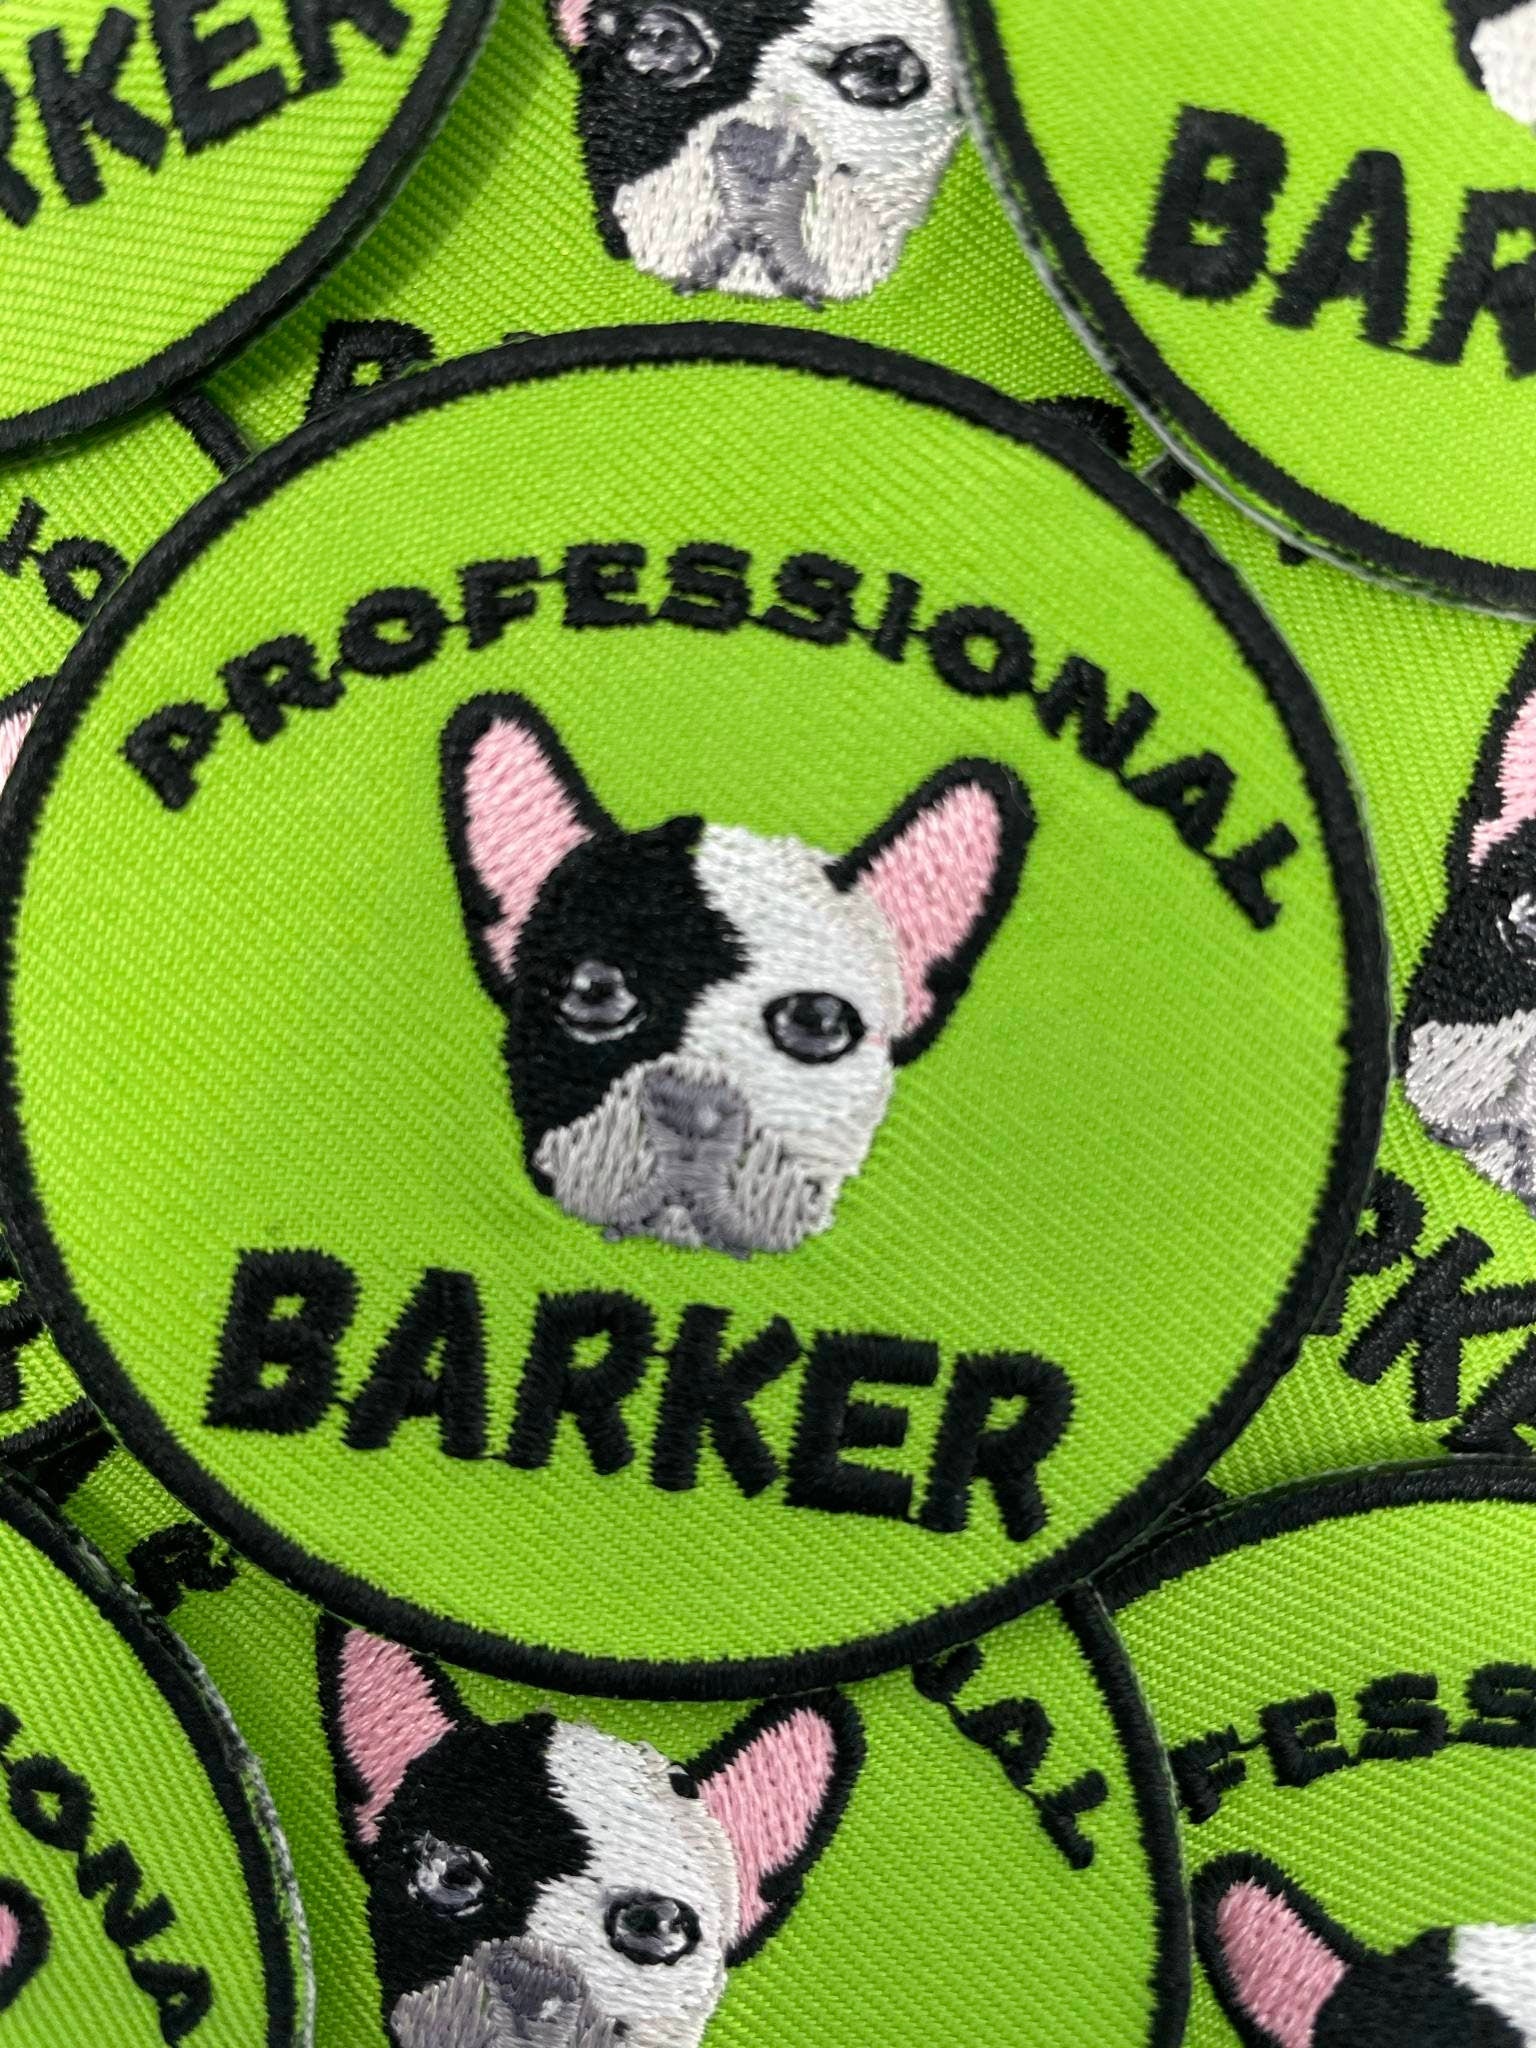 Patched Up Pup: "Professional Barker" Iron-on Embroidered Patch for Dogs, Patch for Dog Lovers, Gift for Your Dog, Sz. 2.5", Doggie Clothes